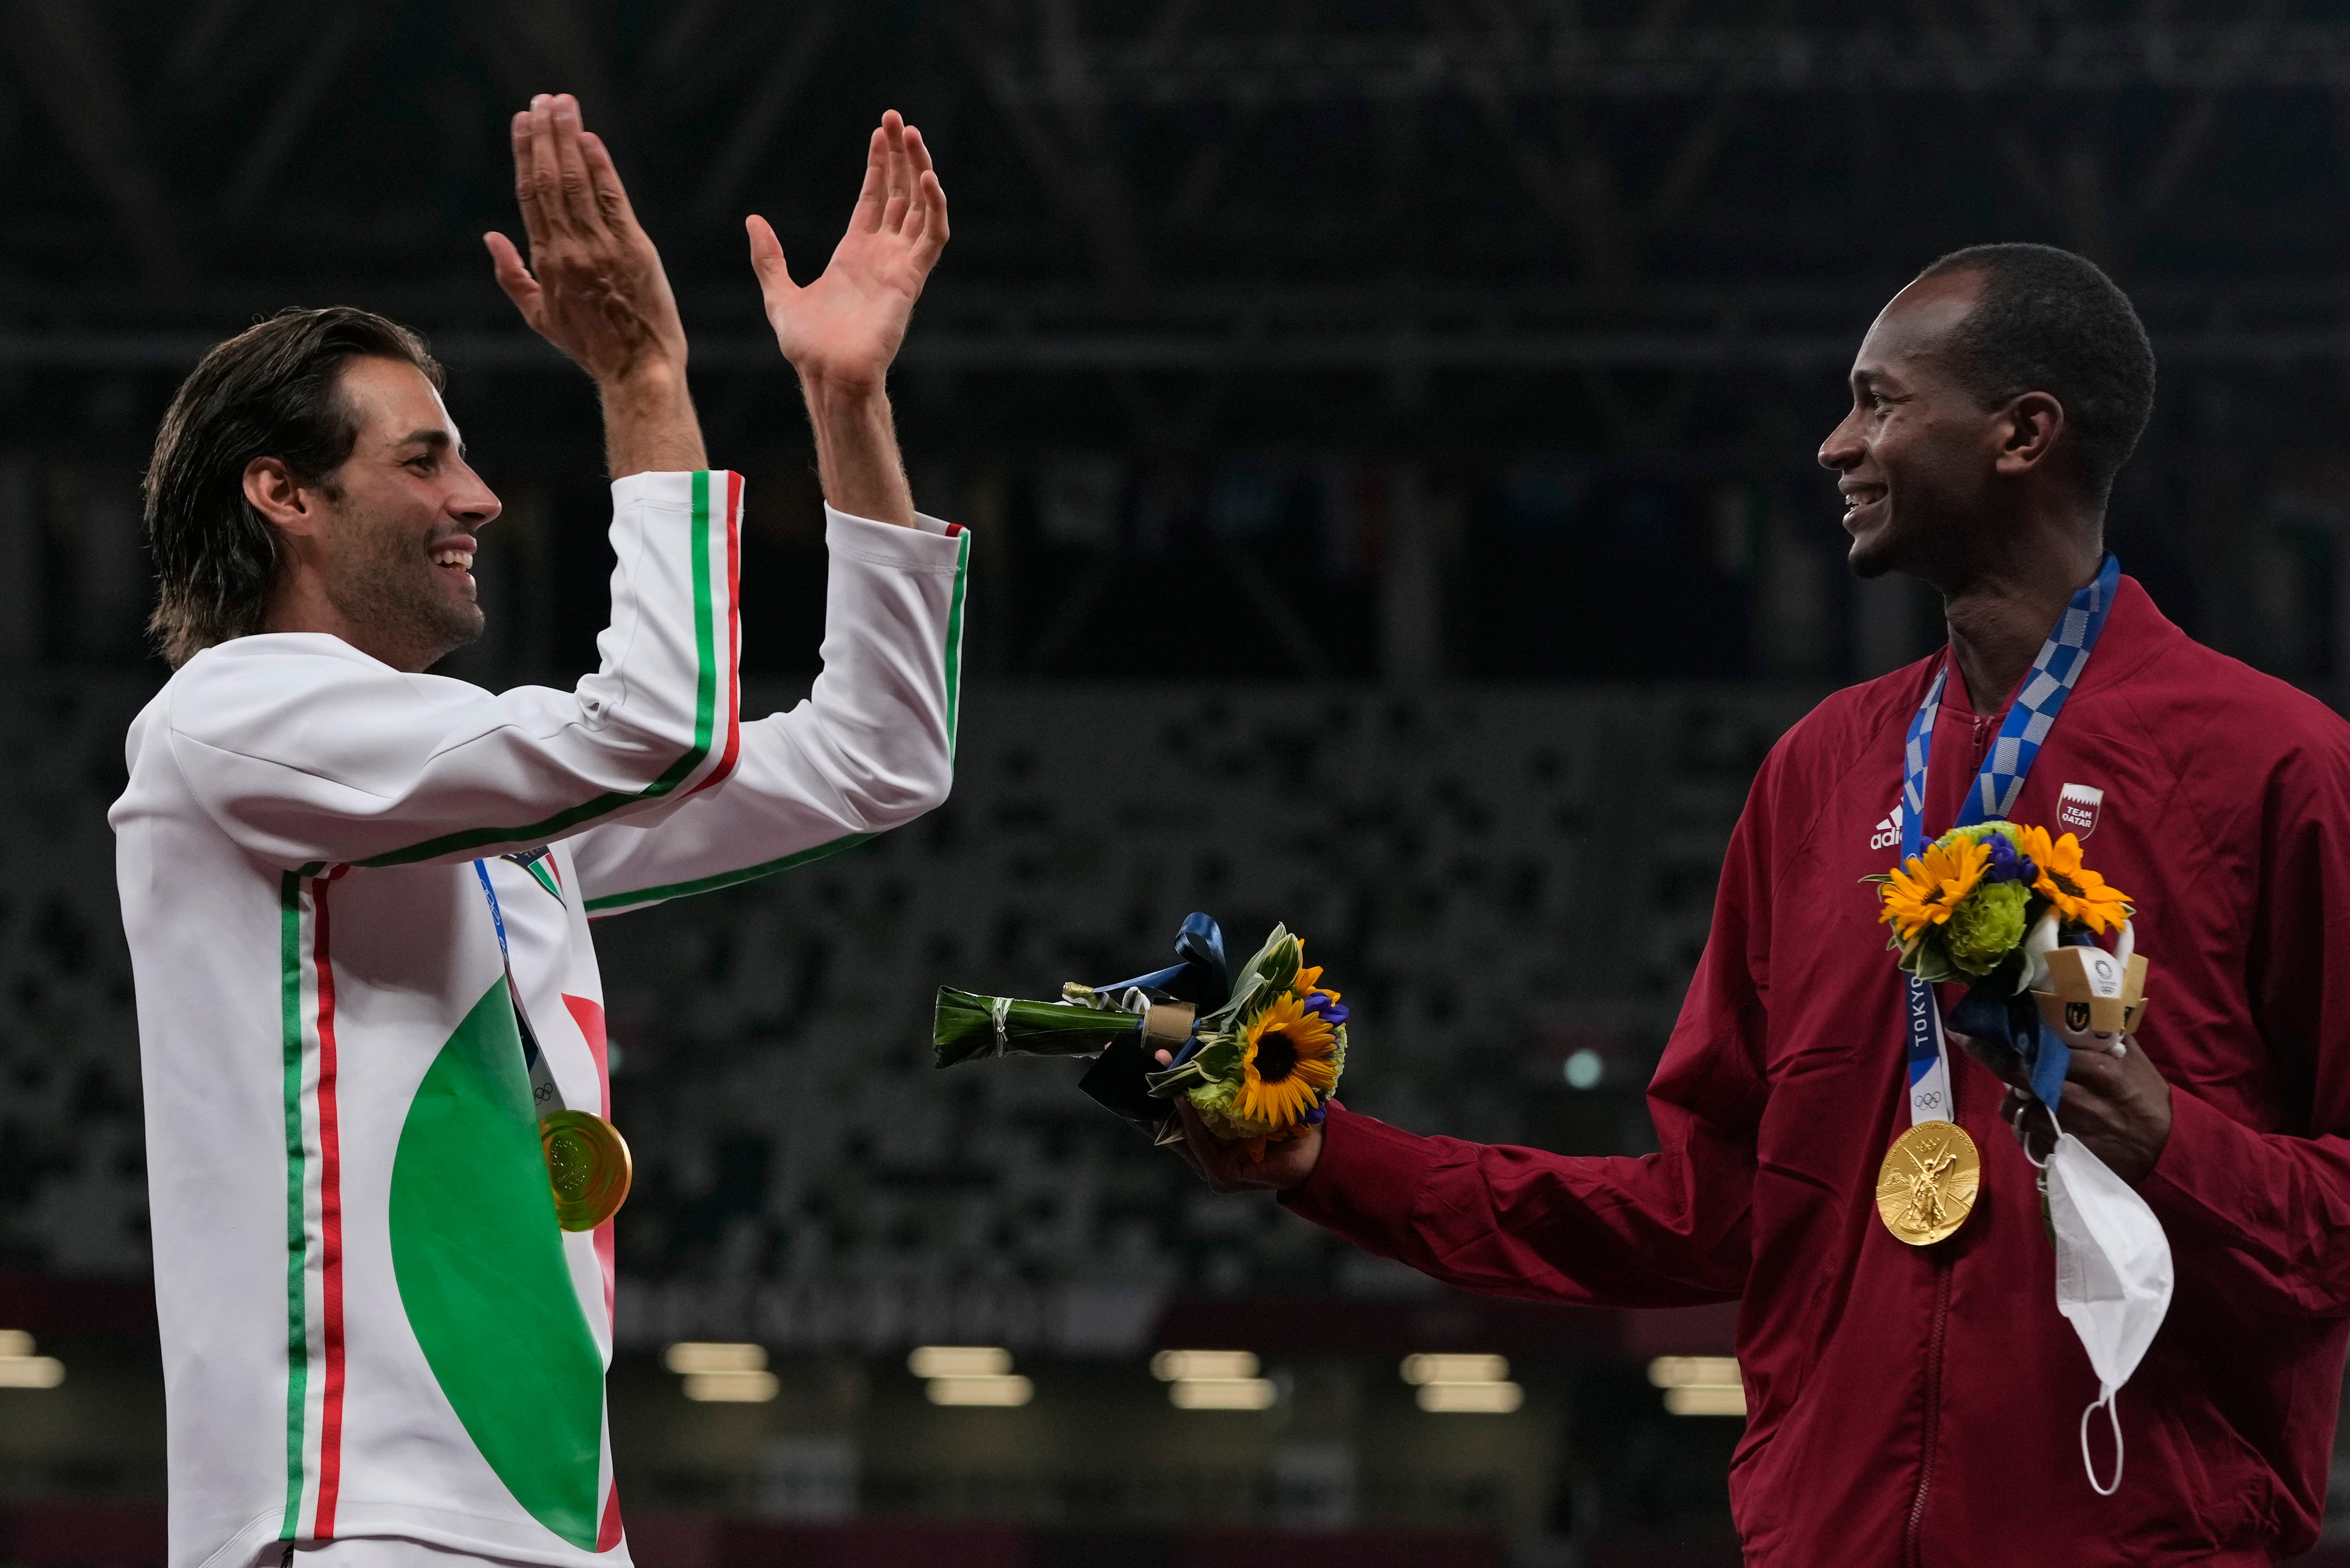 Joint gold medalists Mutaz Barshim (right) of Qatar and Gianmarco Tamberi off Italy celebrate on the podium following the men’s high jump final (Francisco Seco/AP)